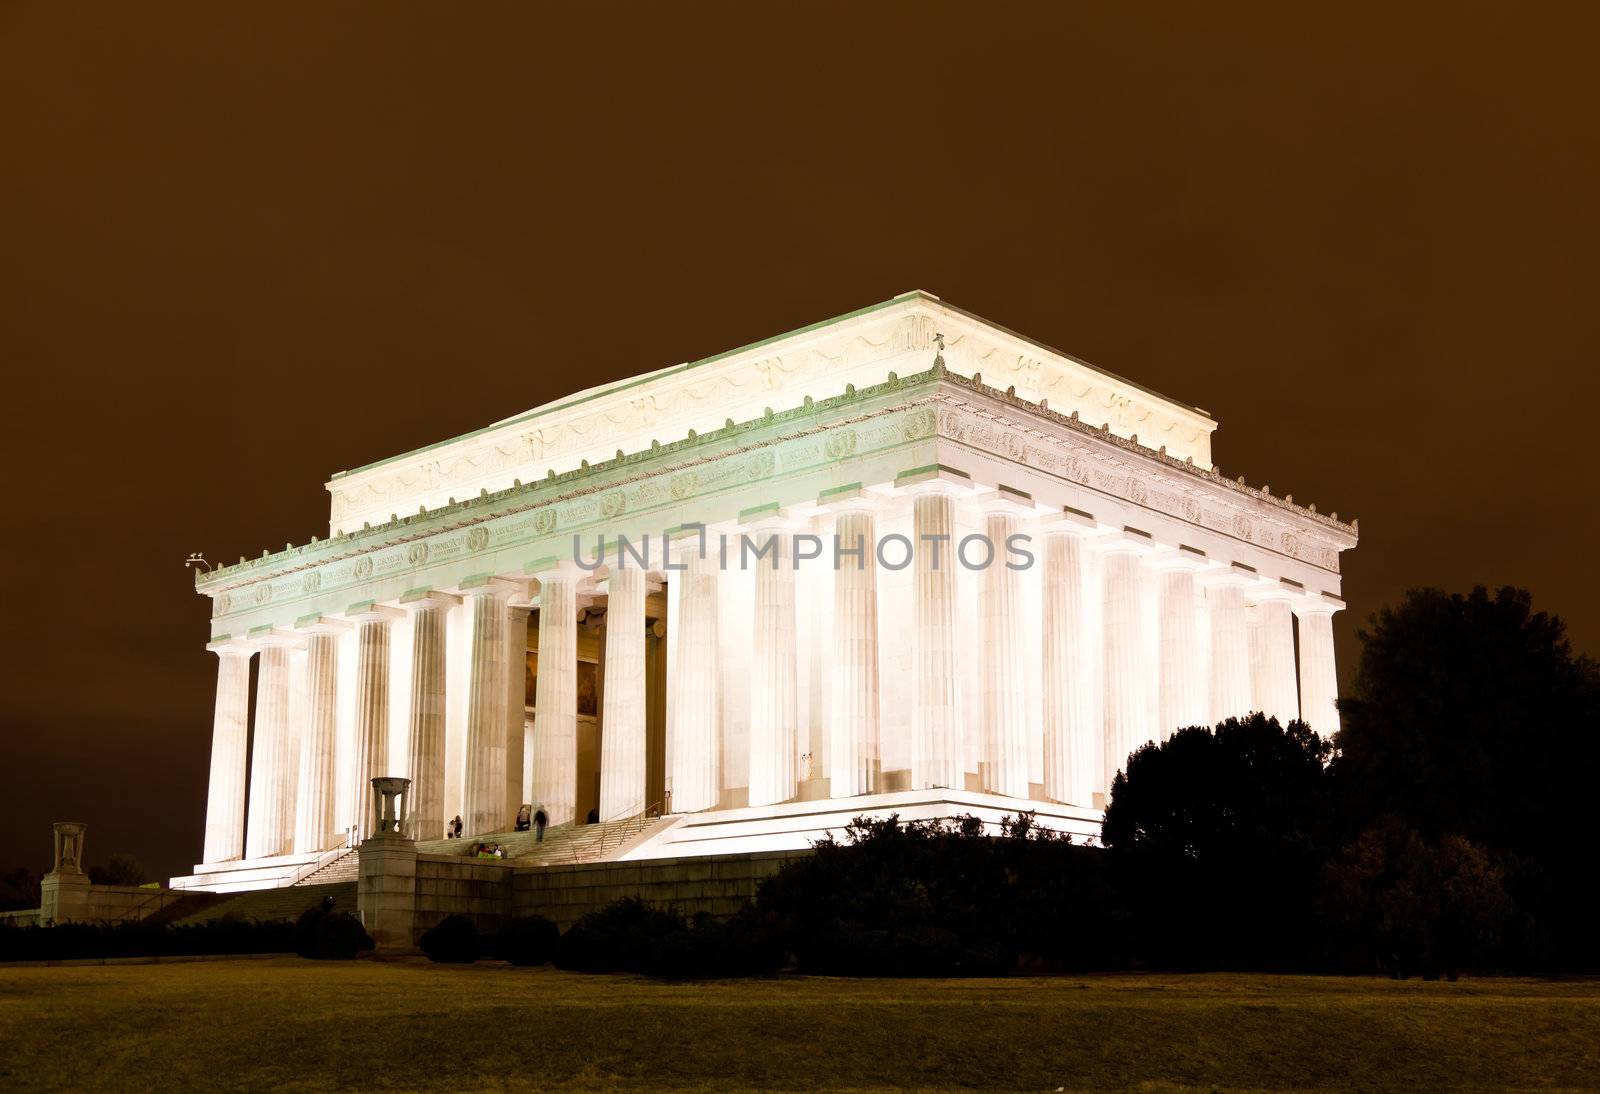 The Lincoln memorial in Washington DC by gary718